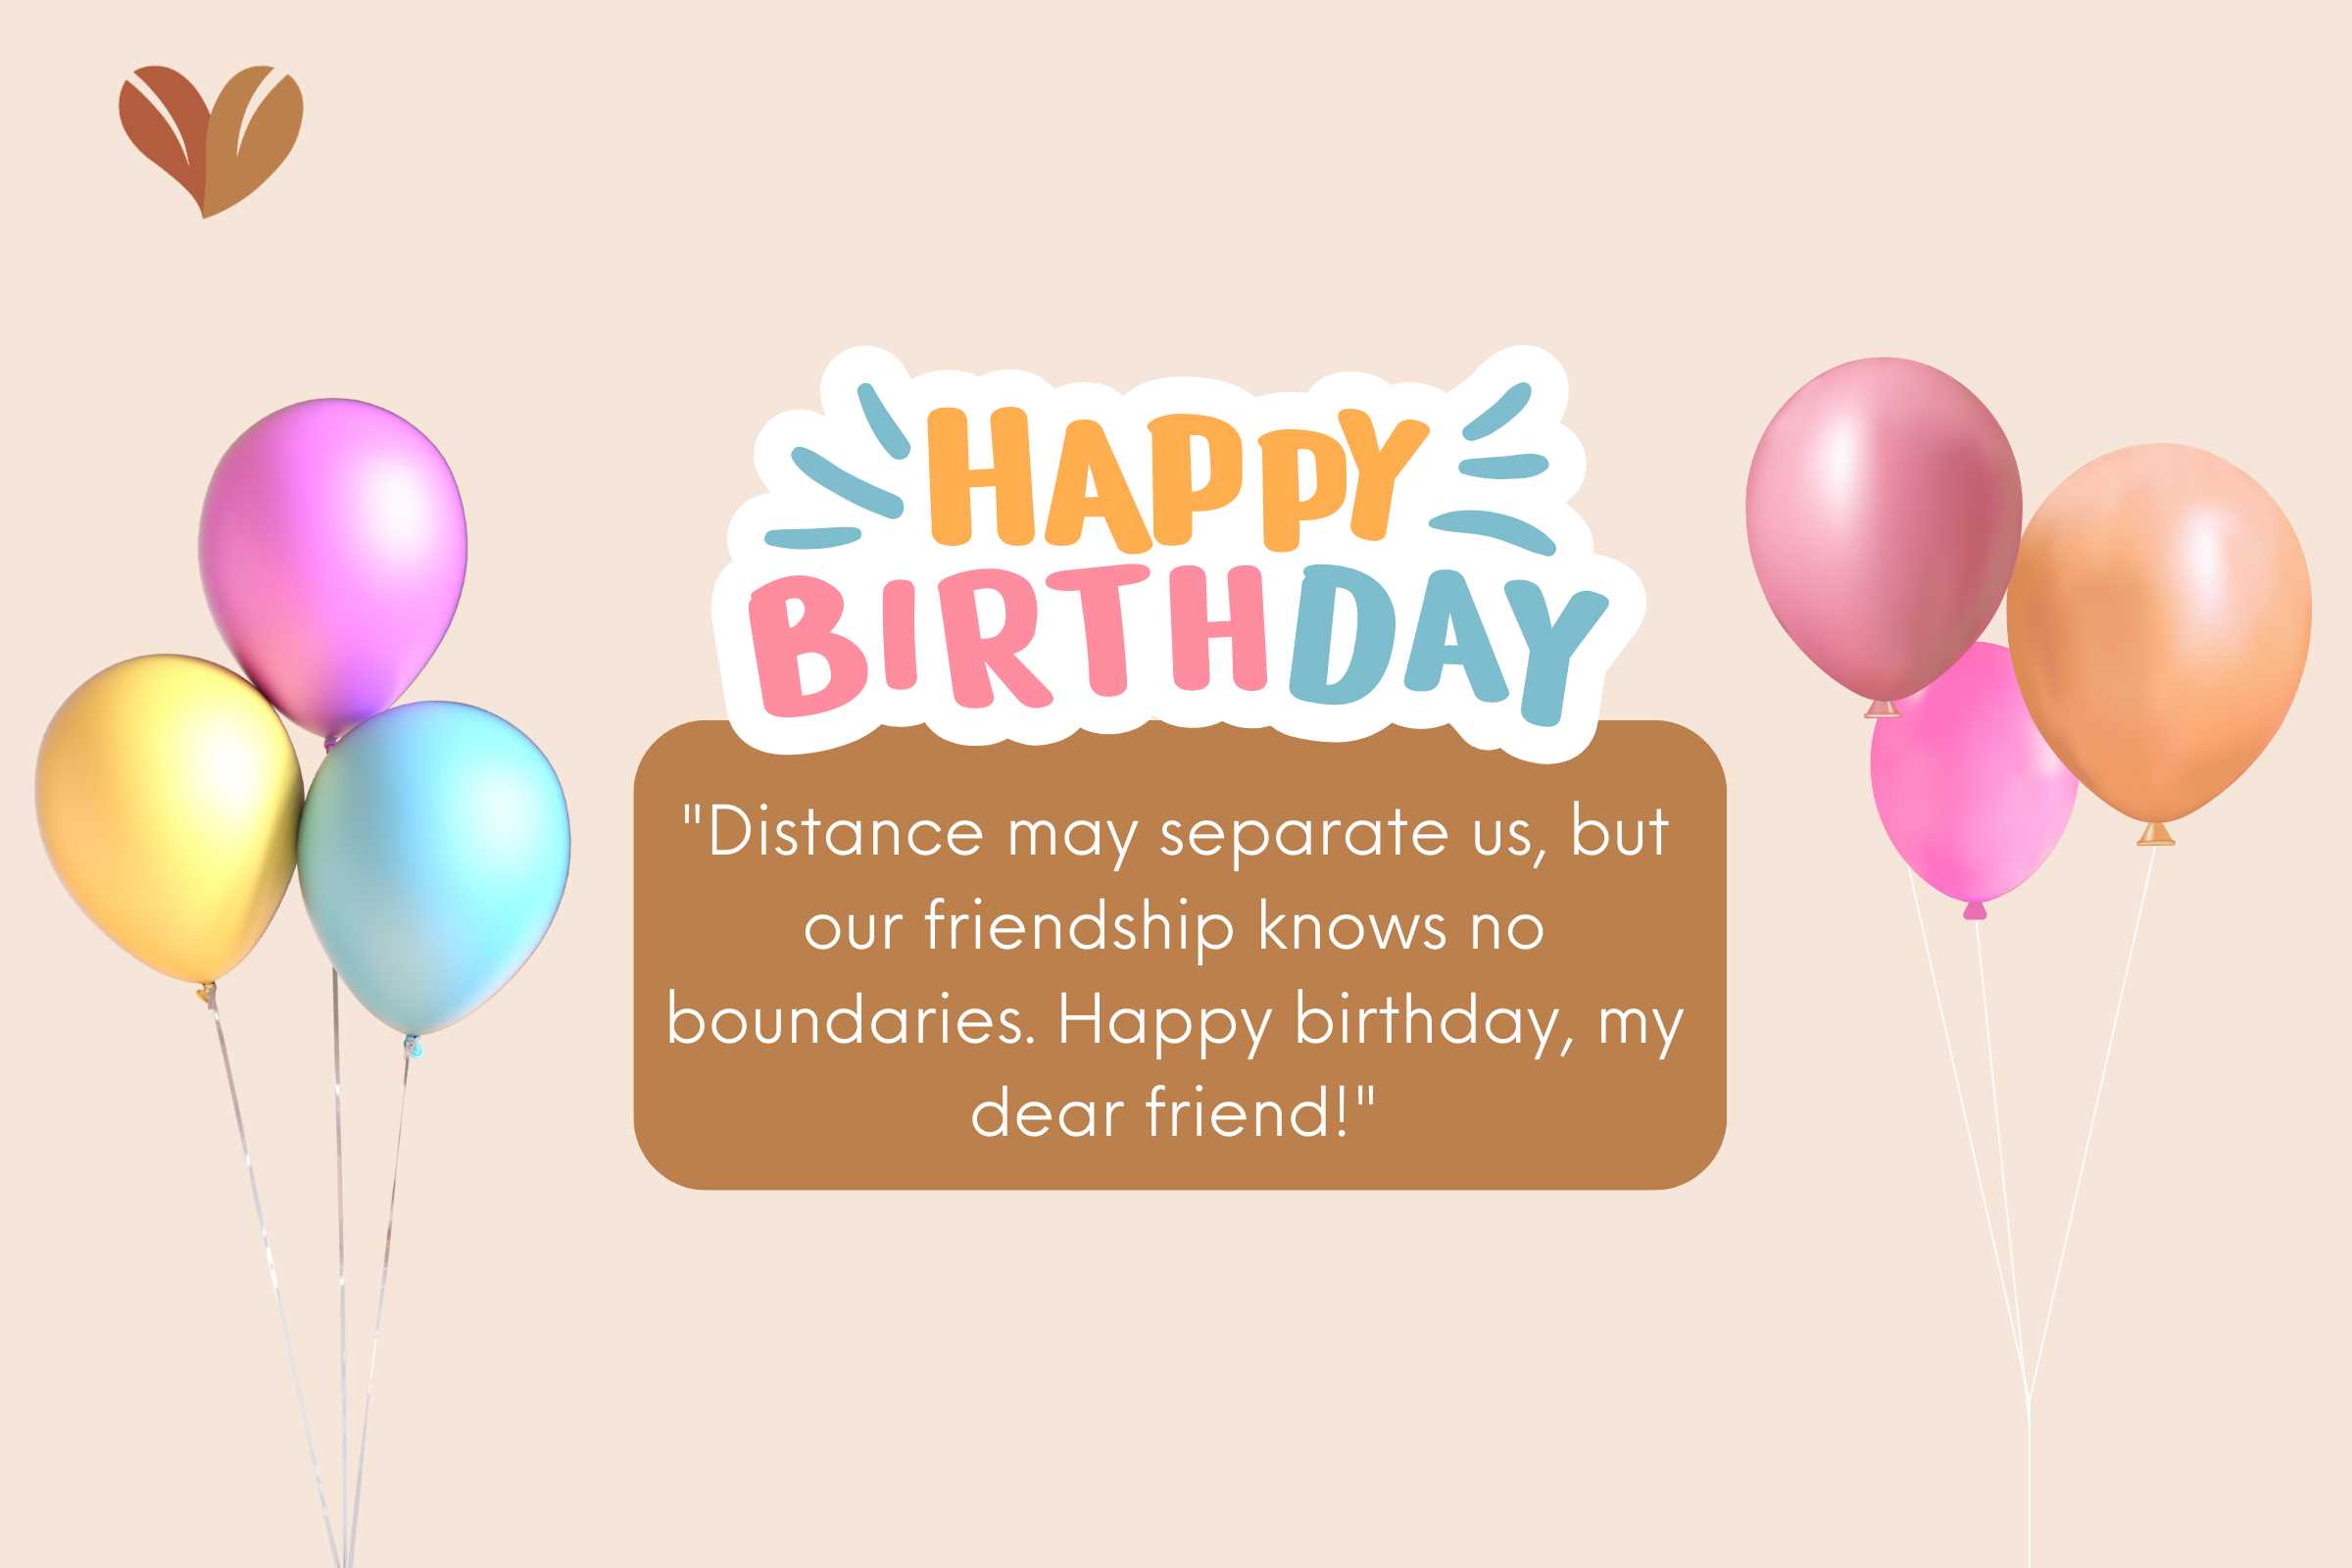 Best Birthday wishes for your long-distance best friend